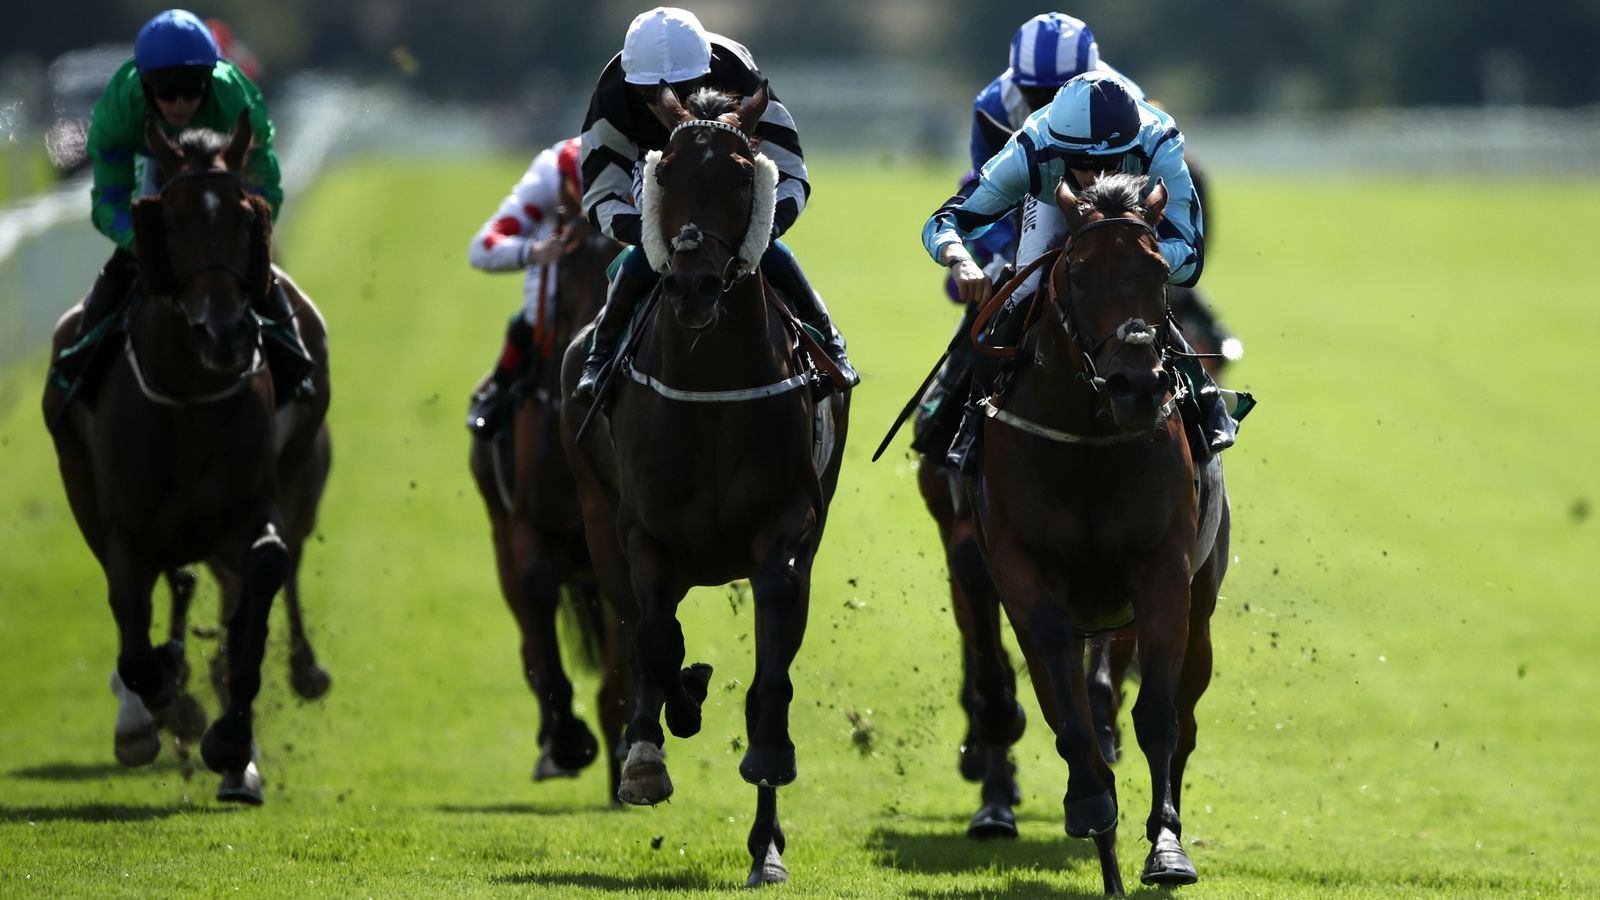 Today on Sky Sports Racing: Stressfree and Maxi King clash at Ripon